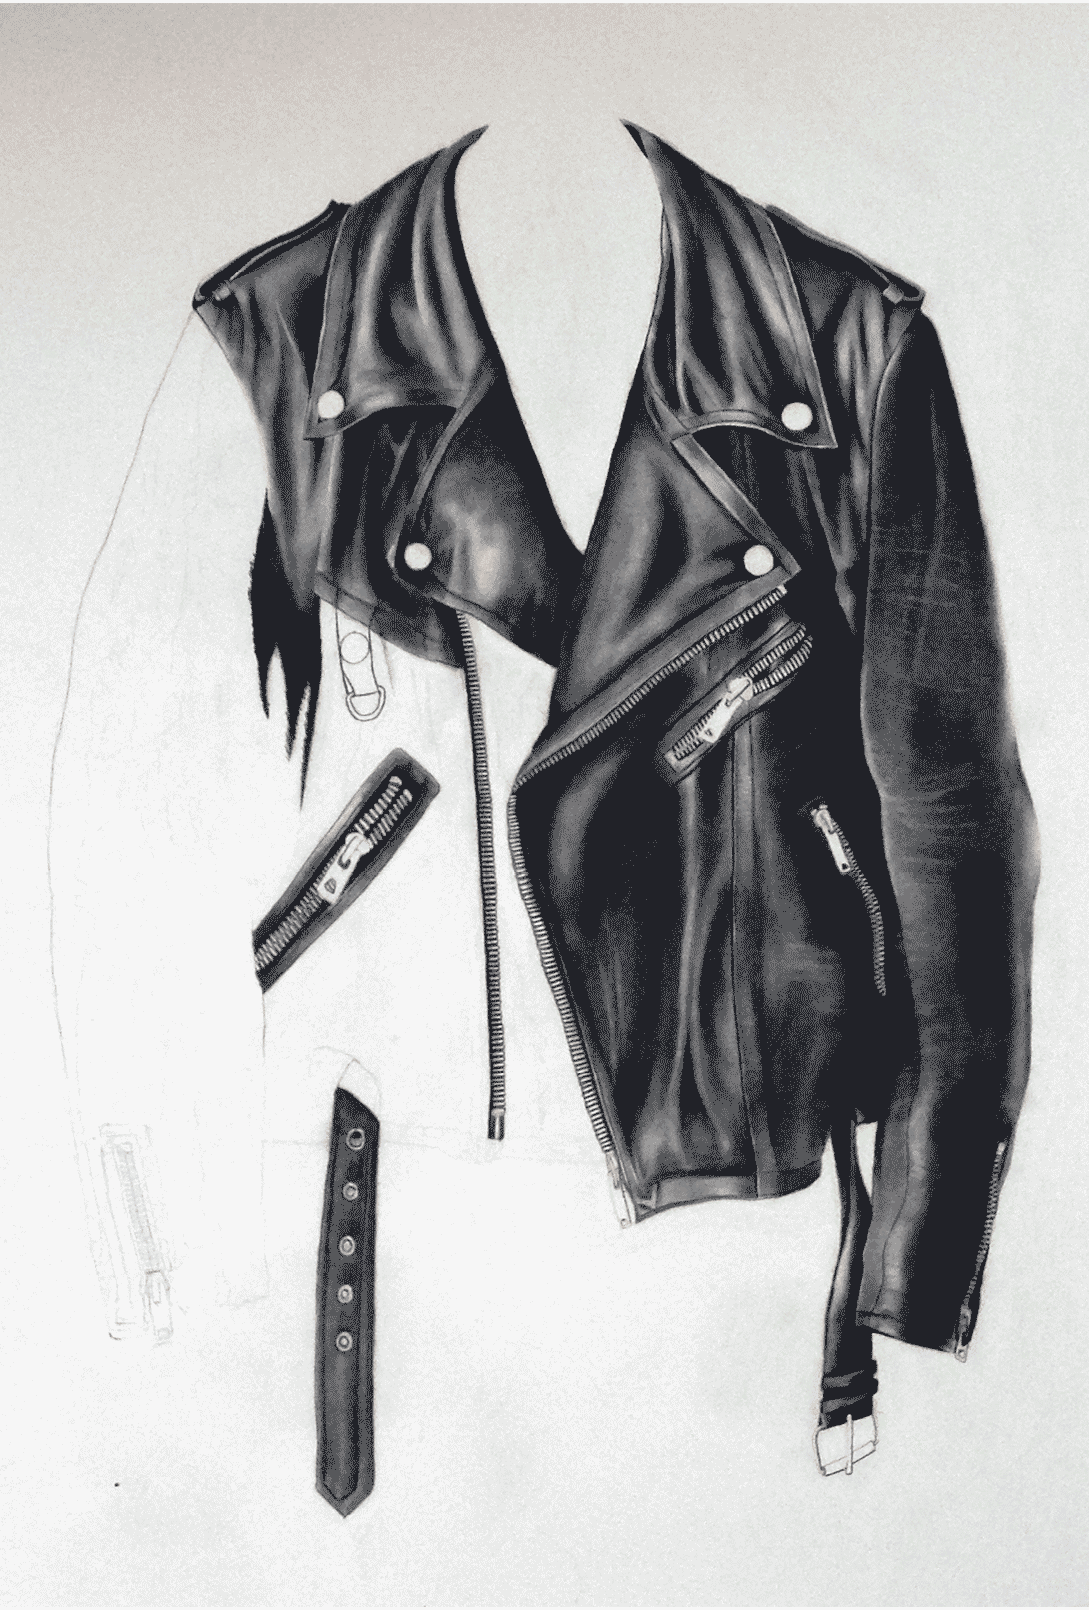 Leather Jacket Sketch at PaintingValley.com | Explore collection of ...